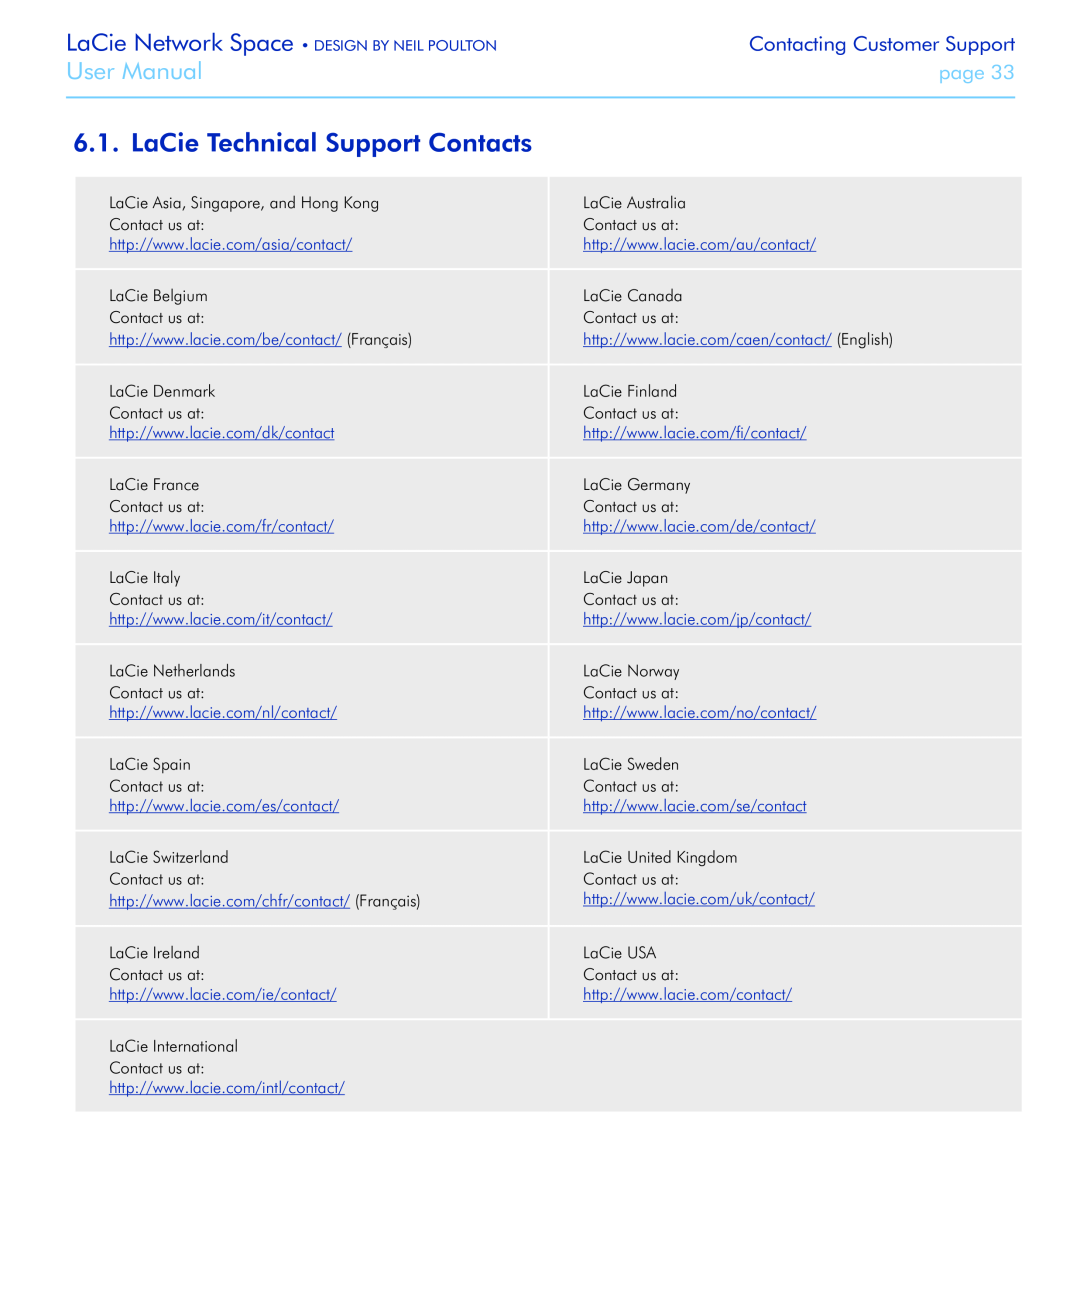 LaCie Network Space user manual LaCie Technical Support Contacts, User Manual, Contacting Customer Support, page 